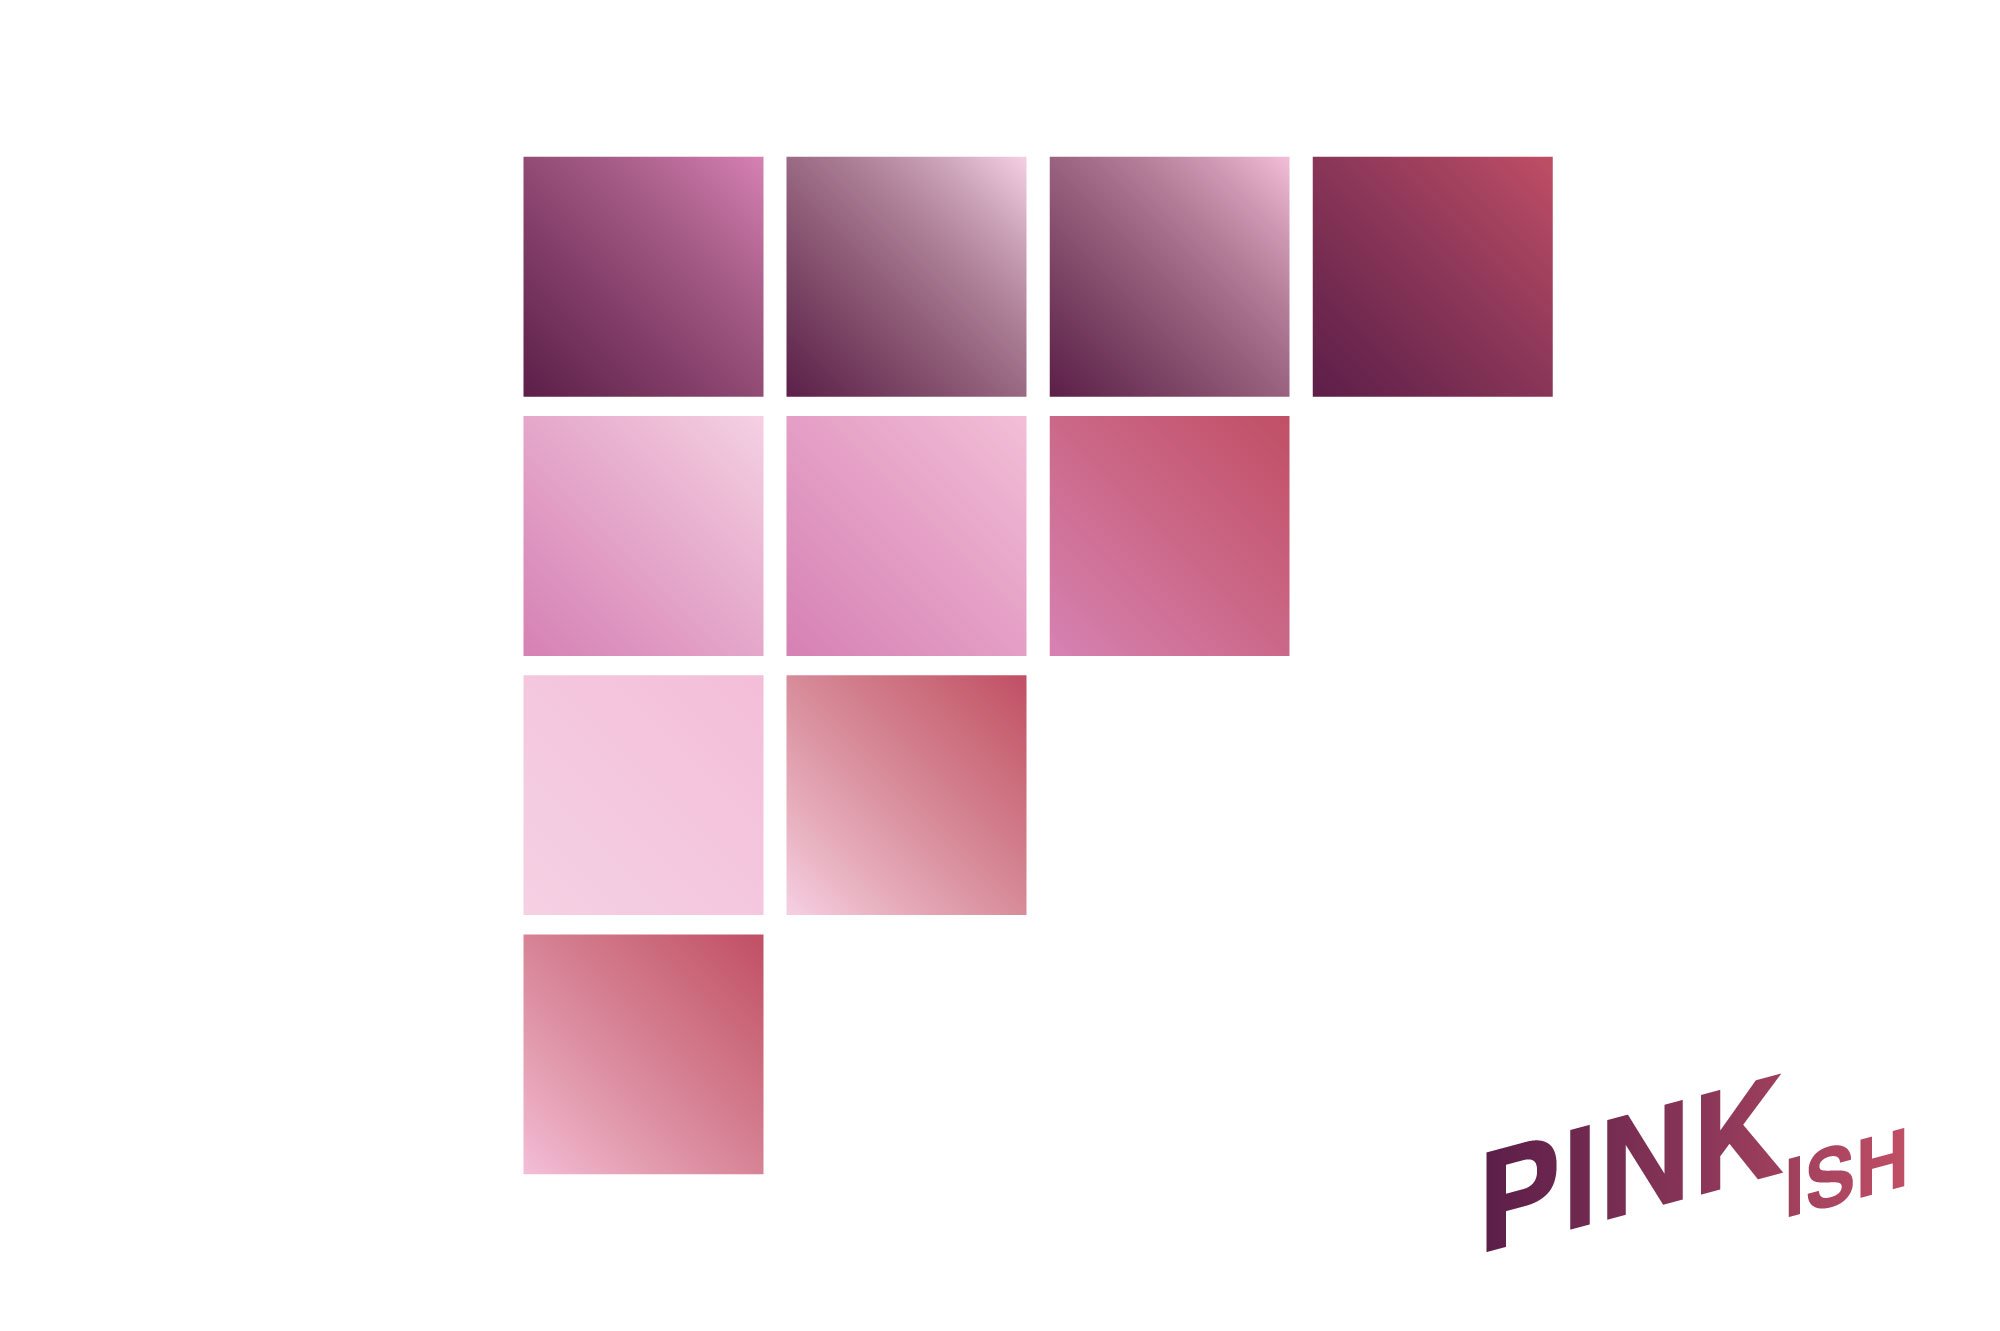 Pinkish Gradients cover image.